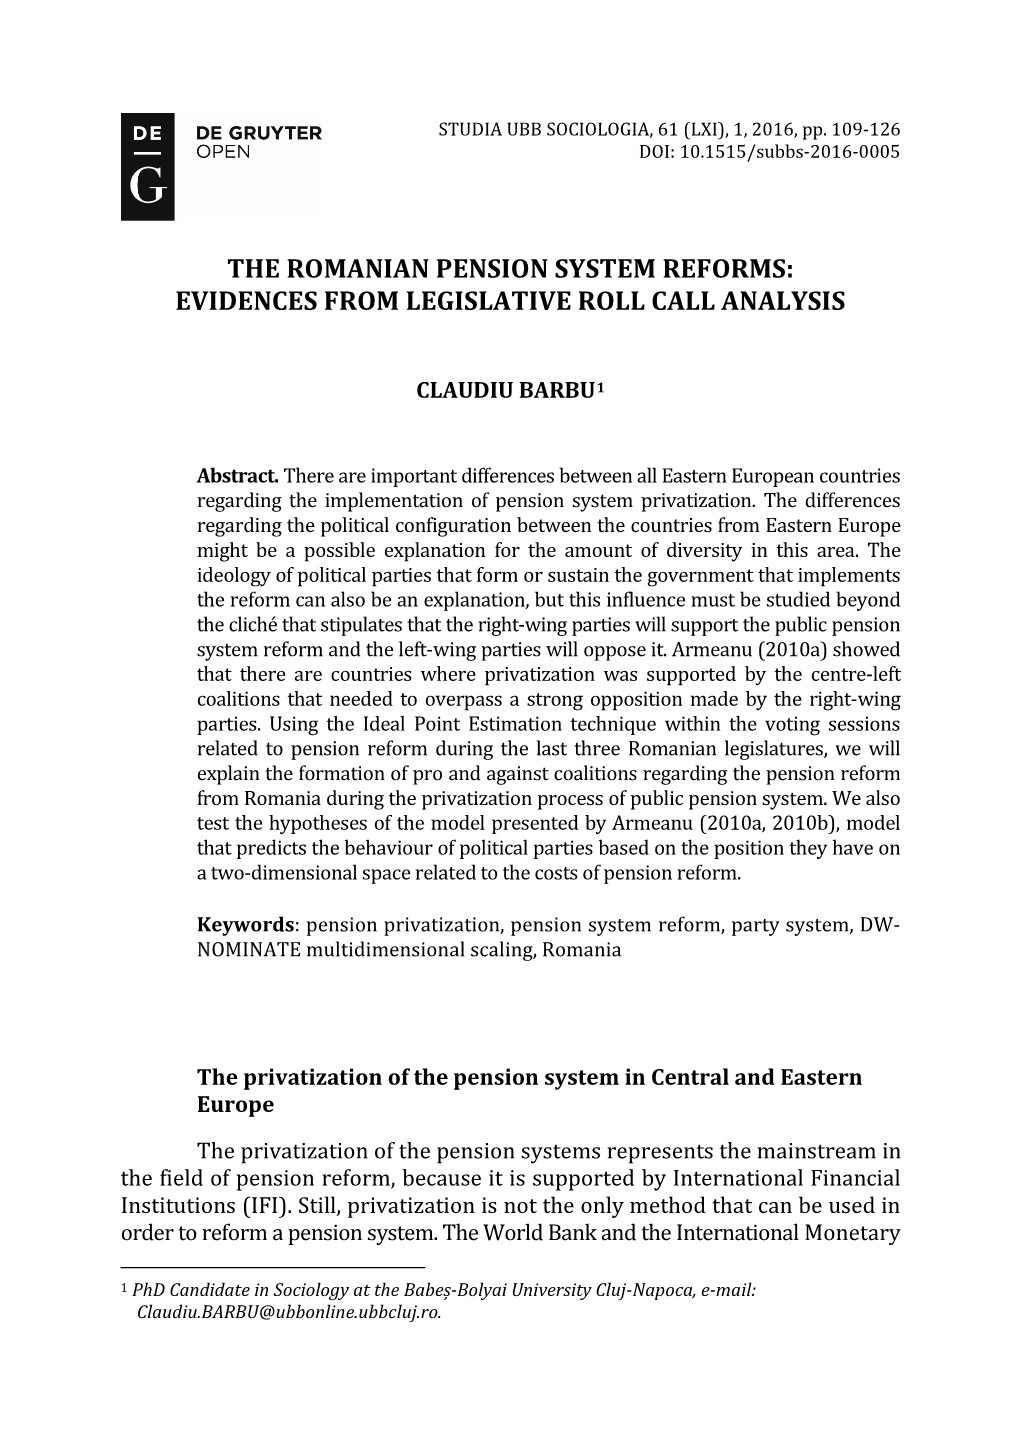 The Romanian Pension System Reforms: Evidences from Legislative Roll Call Analysis